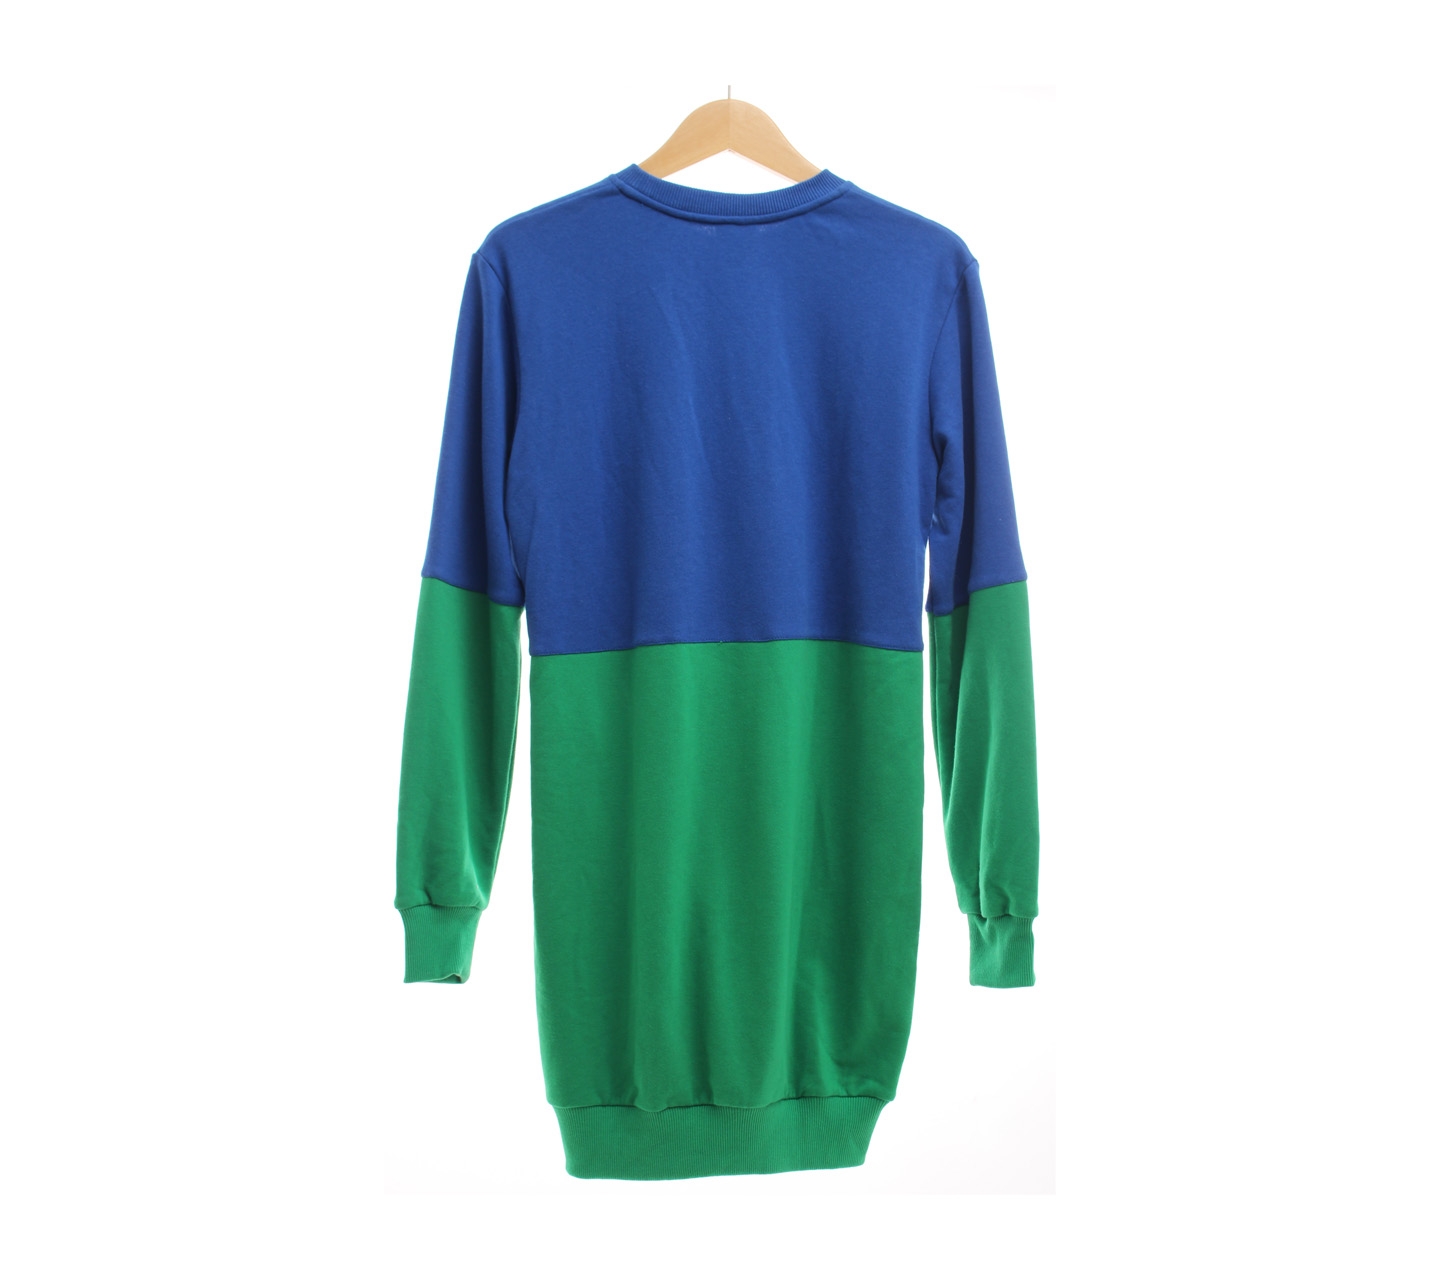 Douche Blue and Green Knit Long Sweater